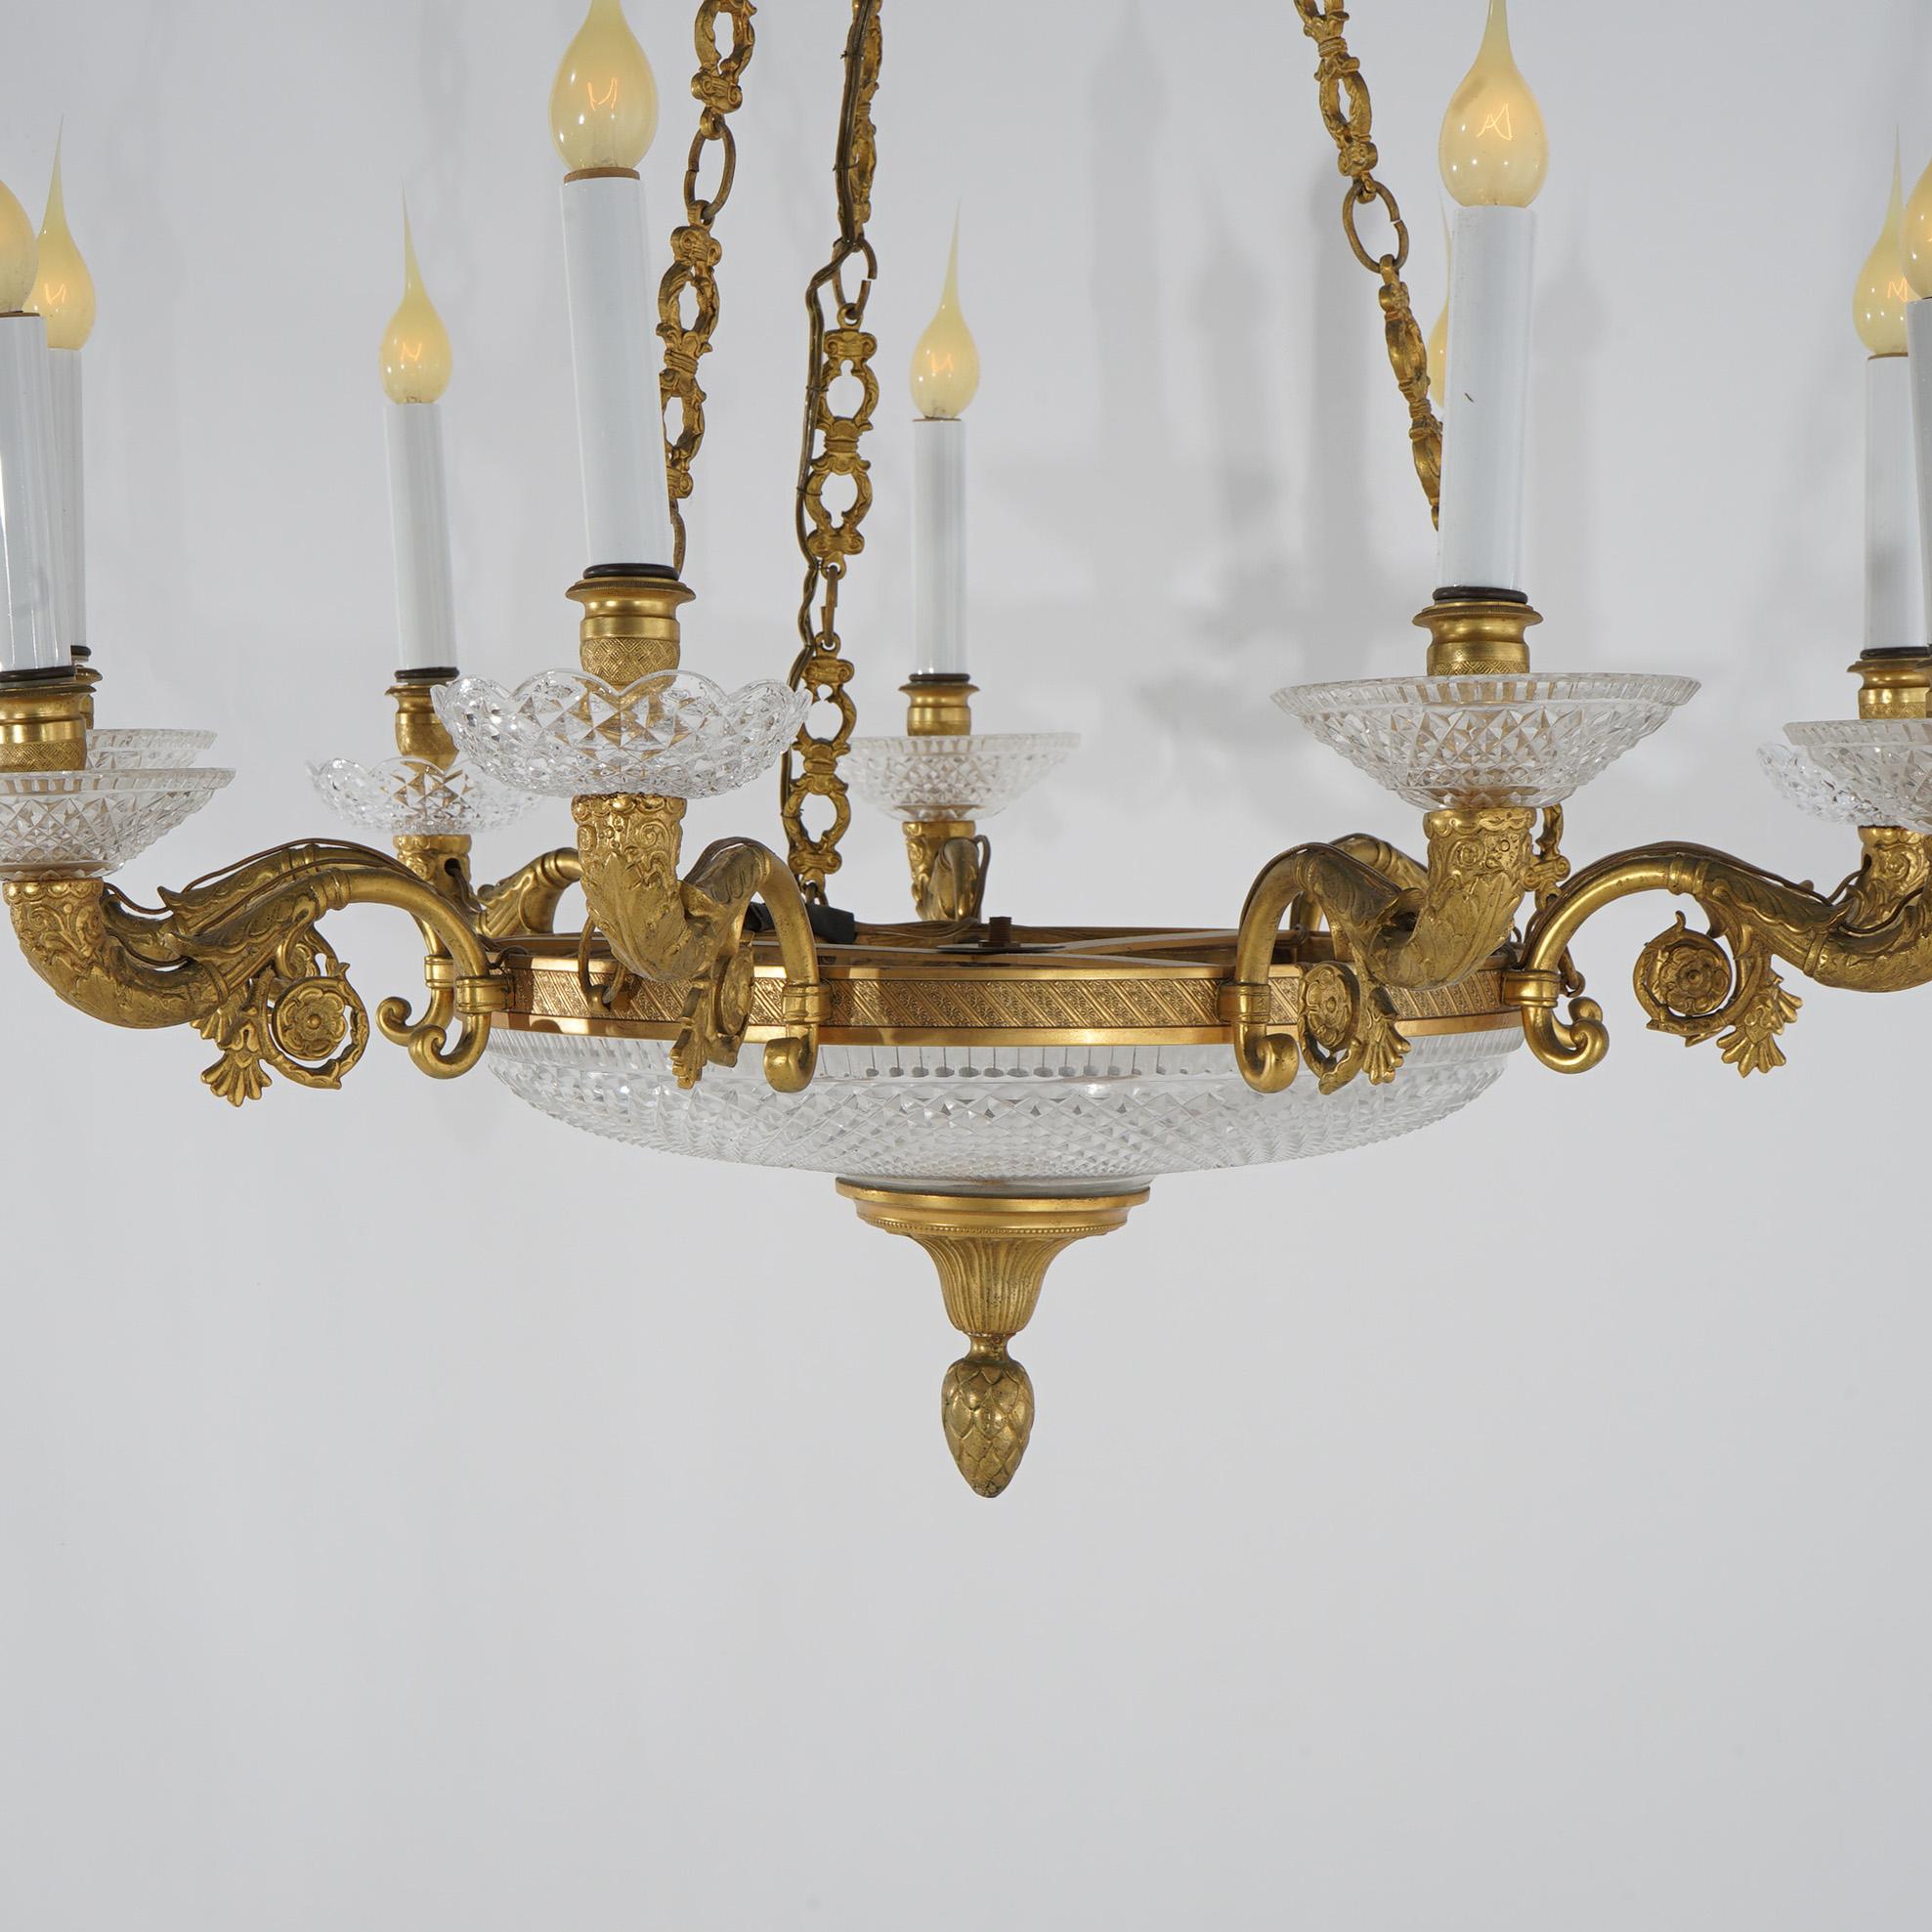 20th Century Antique French Louis XIV Style Gilt Bronze & Crystal Nine-Light Chandelier For Sale